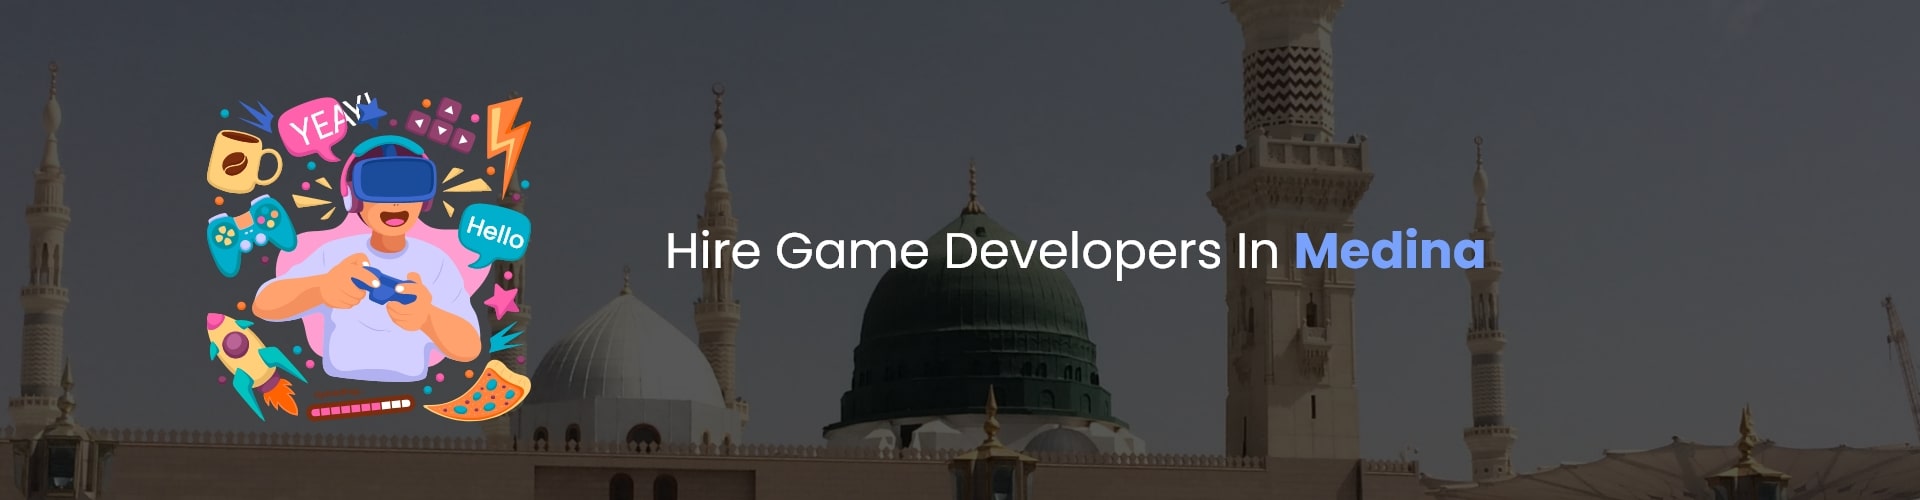 hire game developers in medina